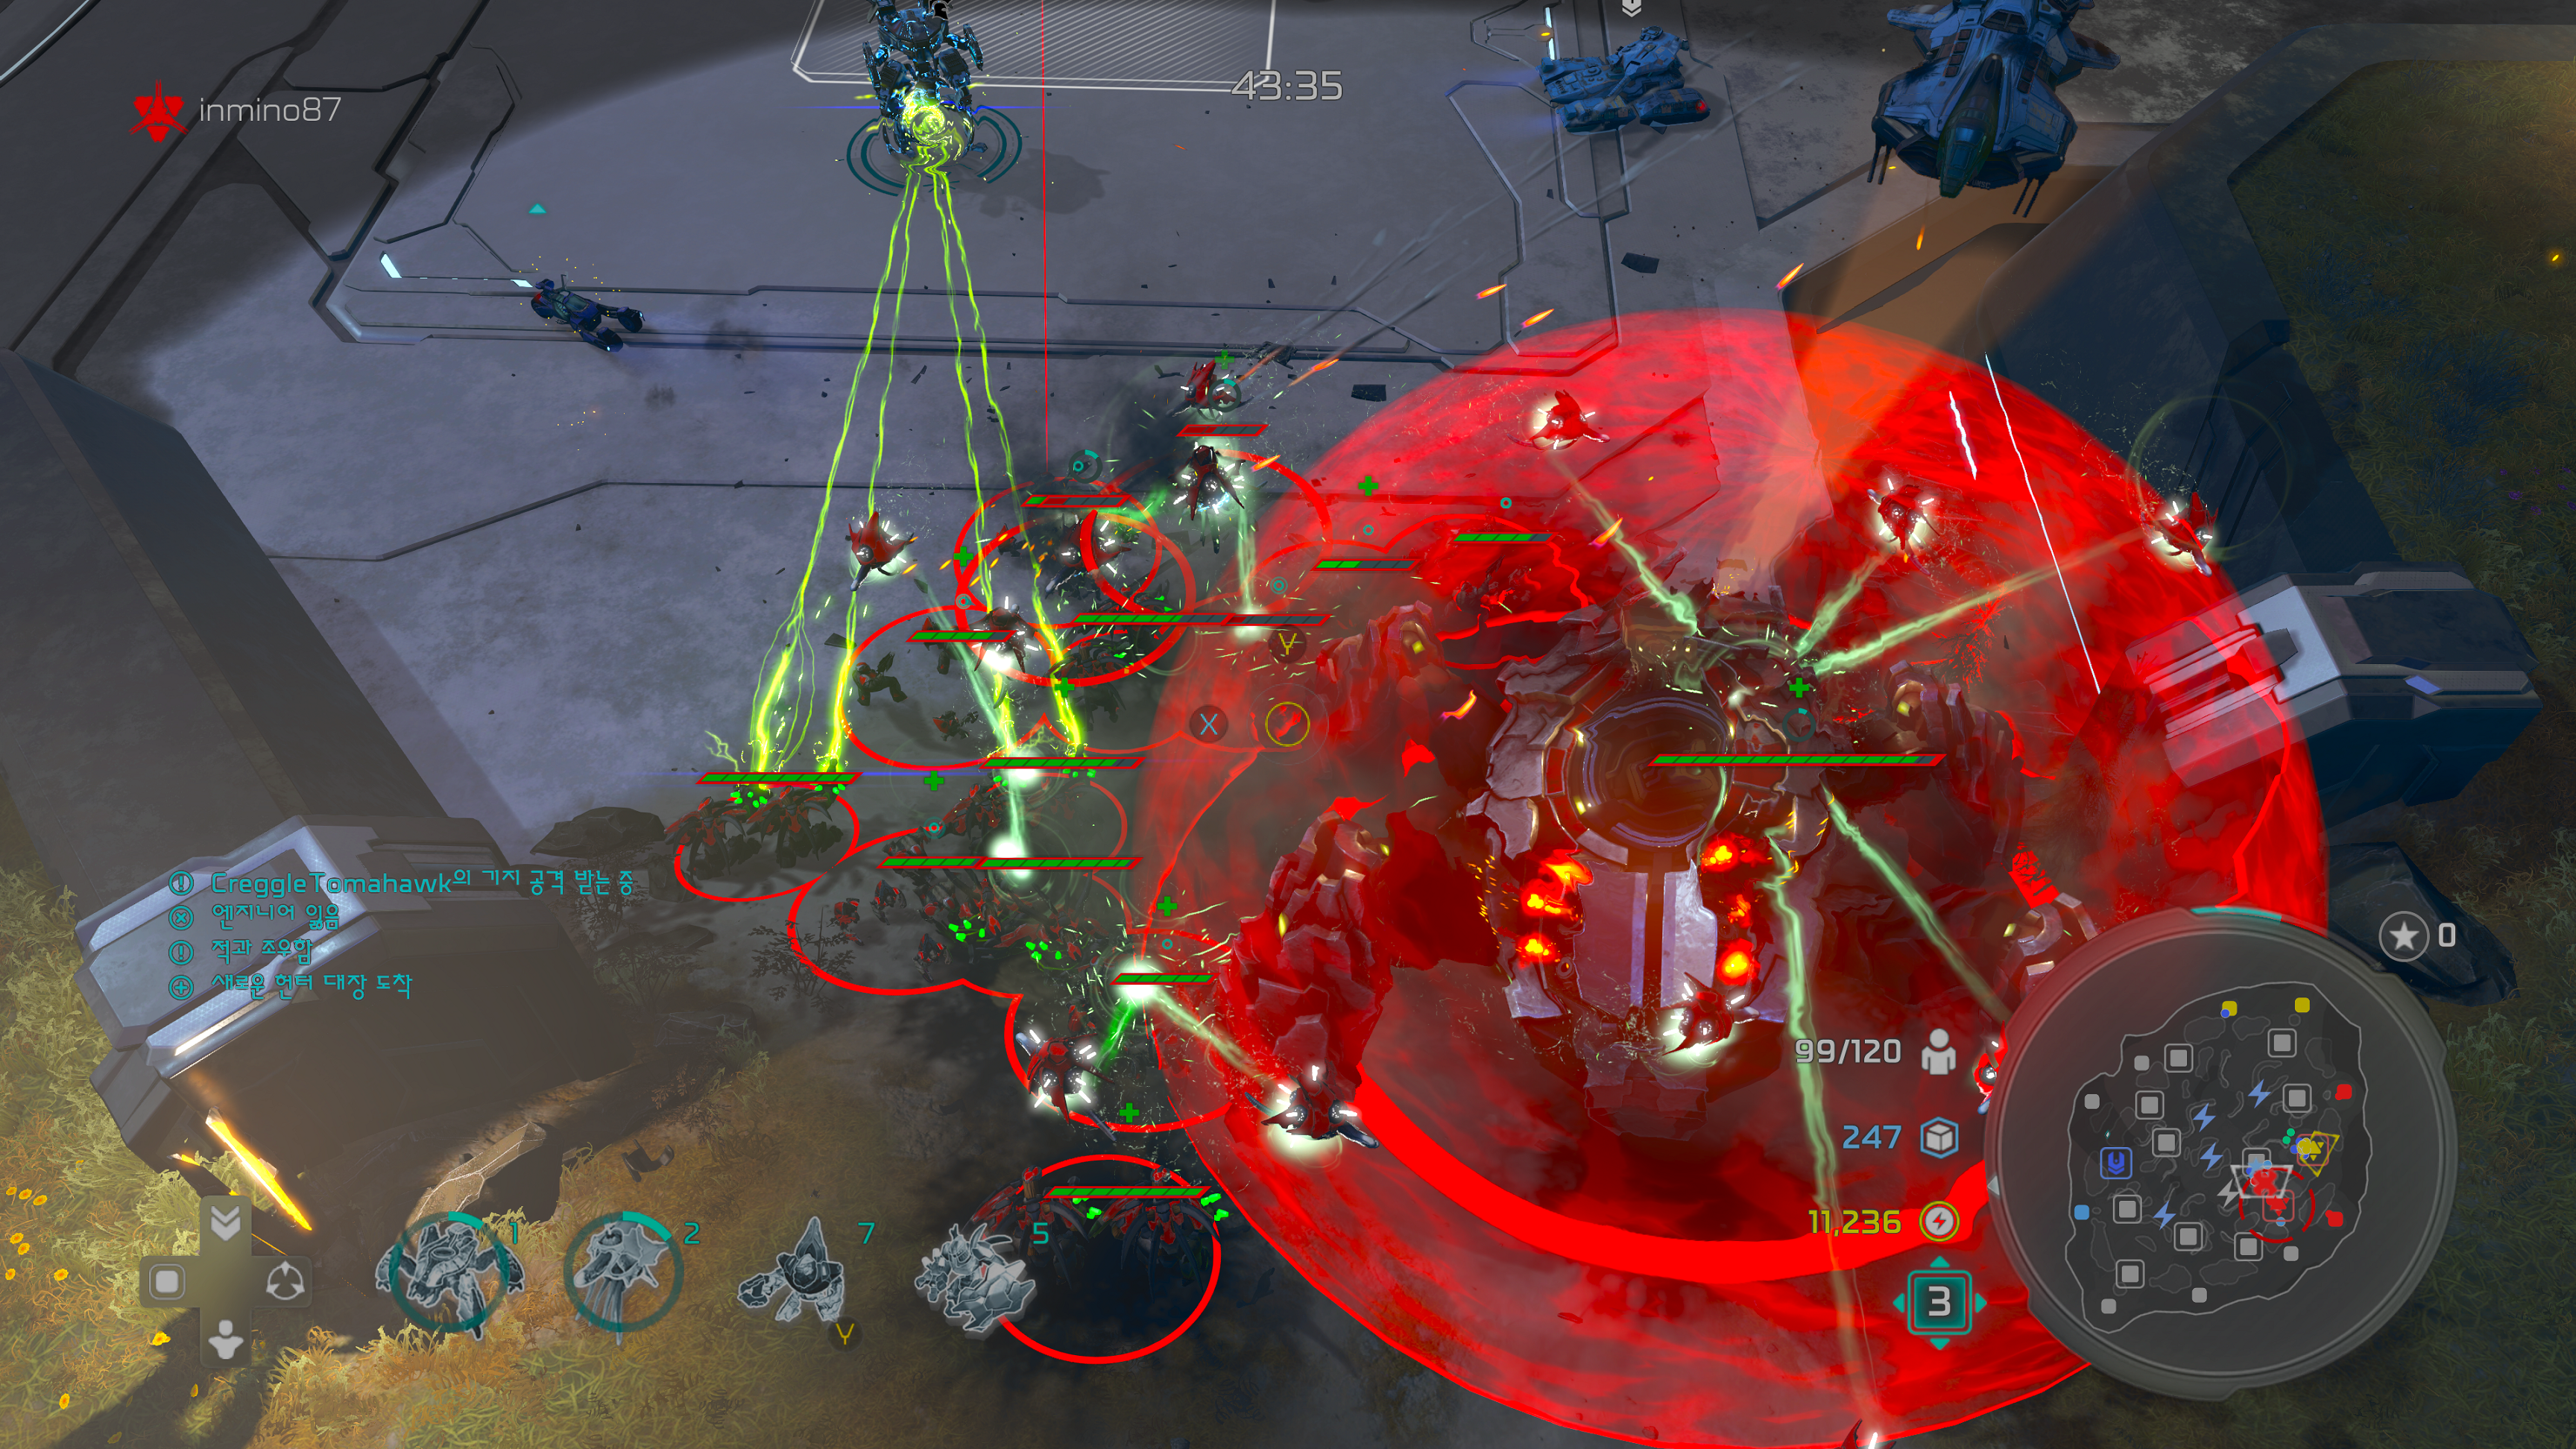 Halo Wars 2 2020-07-28 22-06-27.png